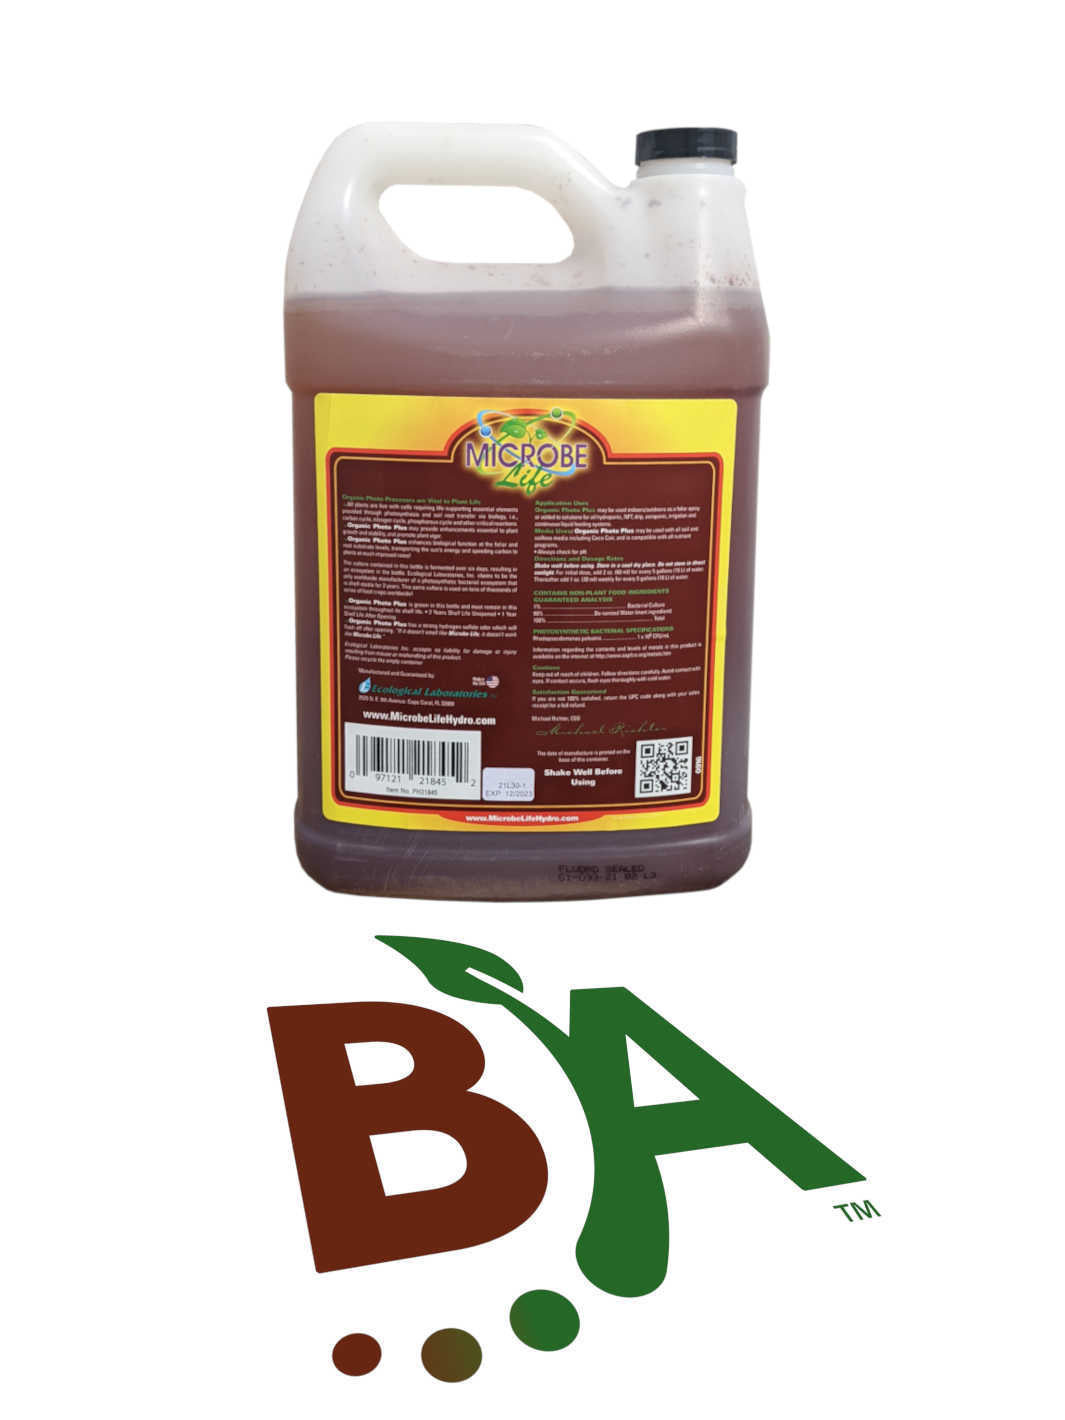 Back Label of Organic Photo Plus from Microbe Life Hydroponics